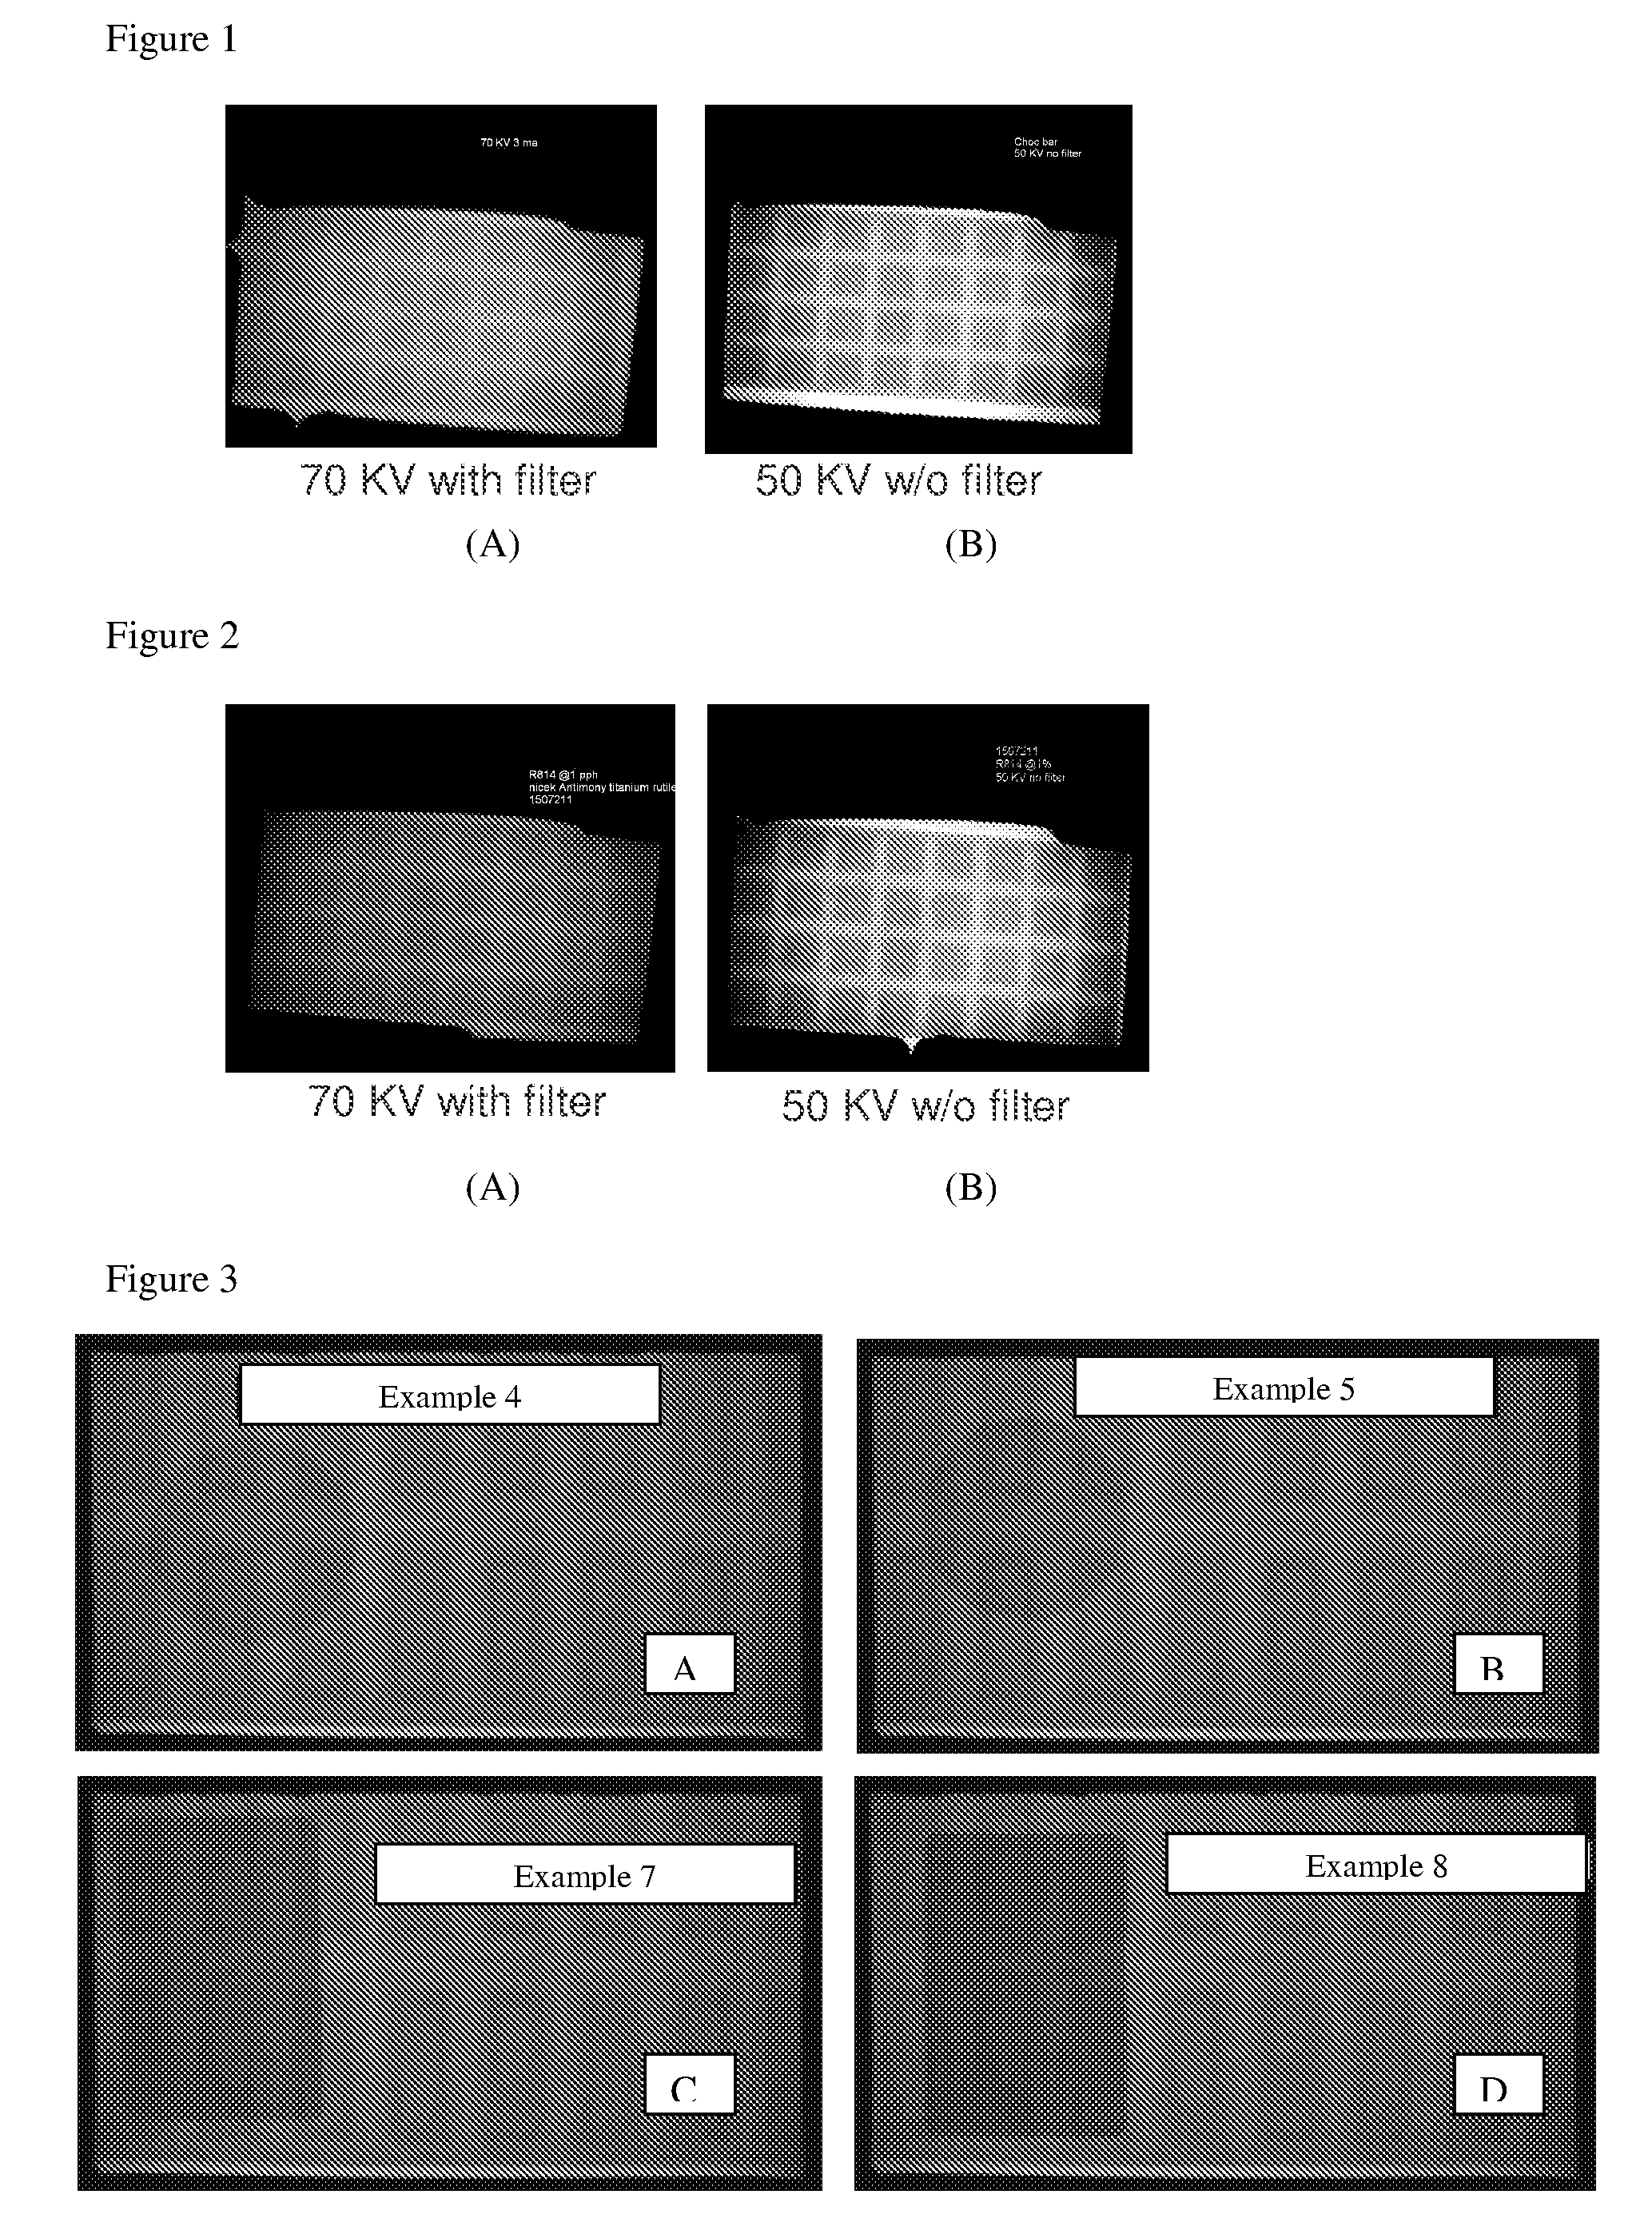 Thermoplastic composition having improved X-ray contrast, method of making, and articles prepared therefrom